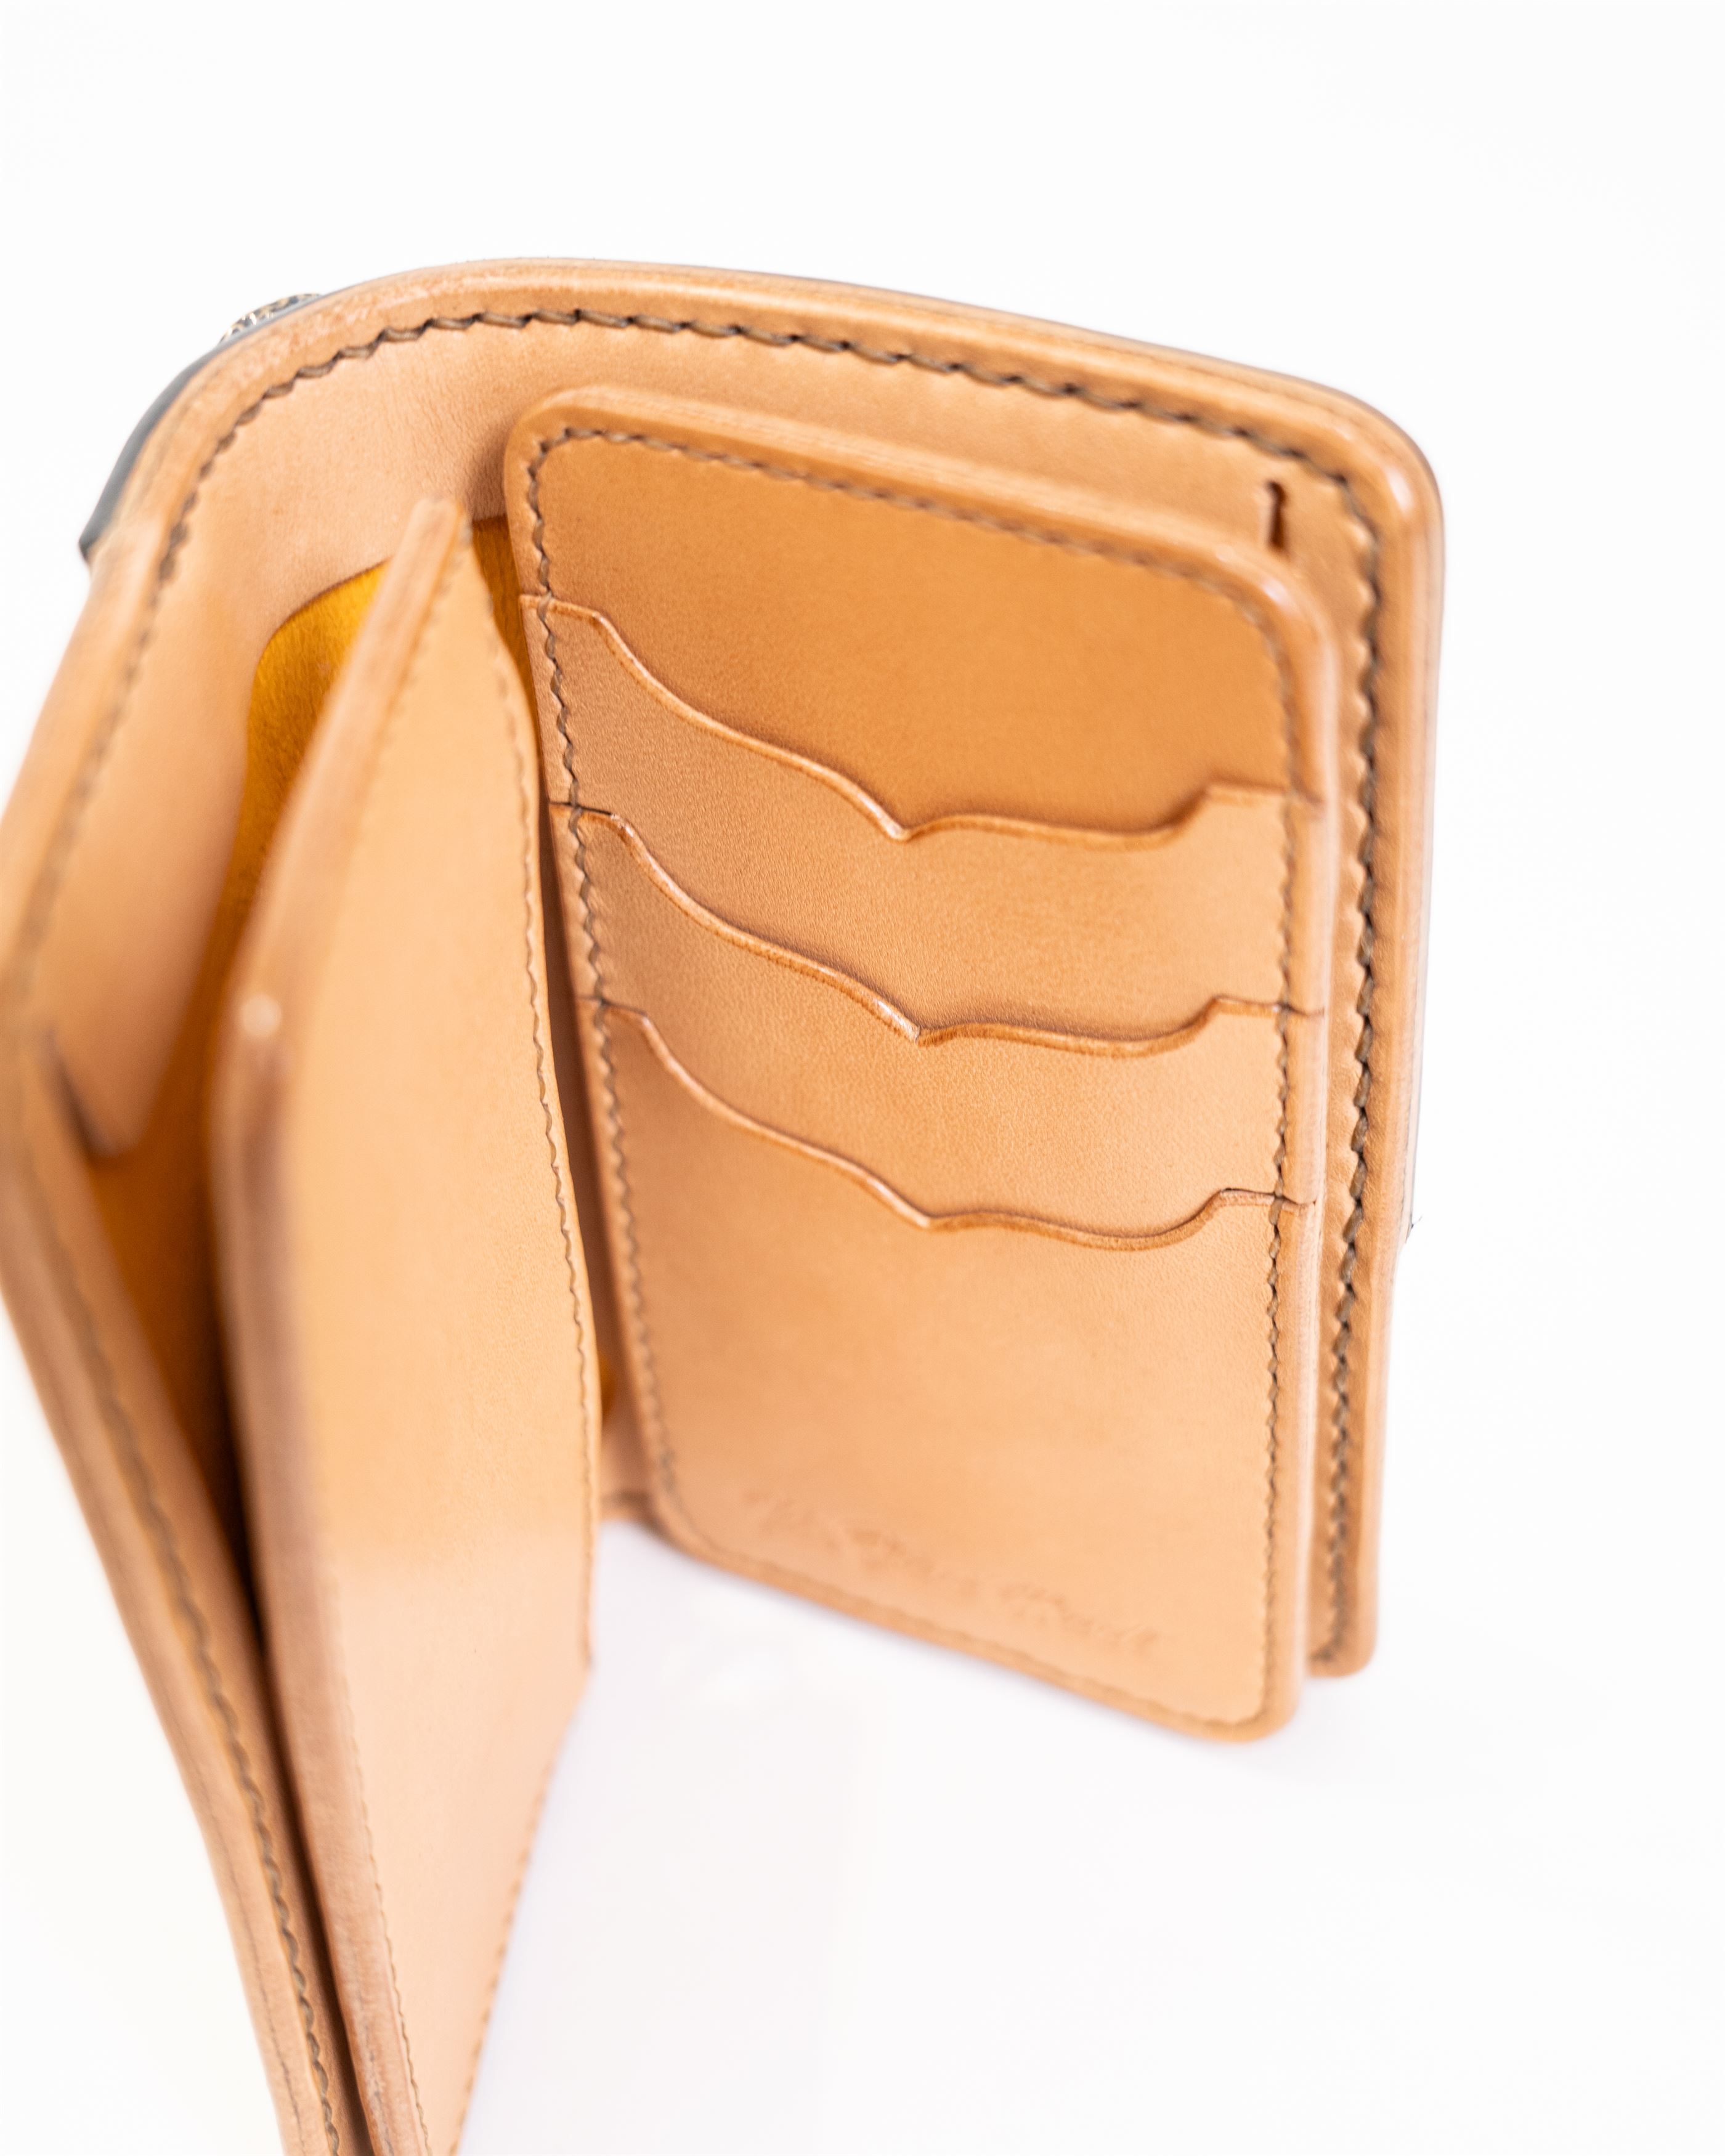 Born Free Leather – Premium leather goods made by hand in Nevada.